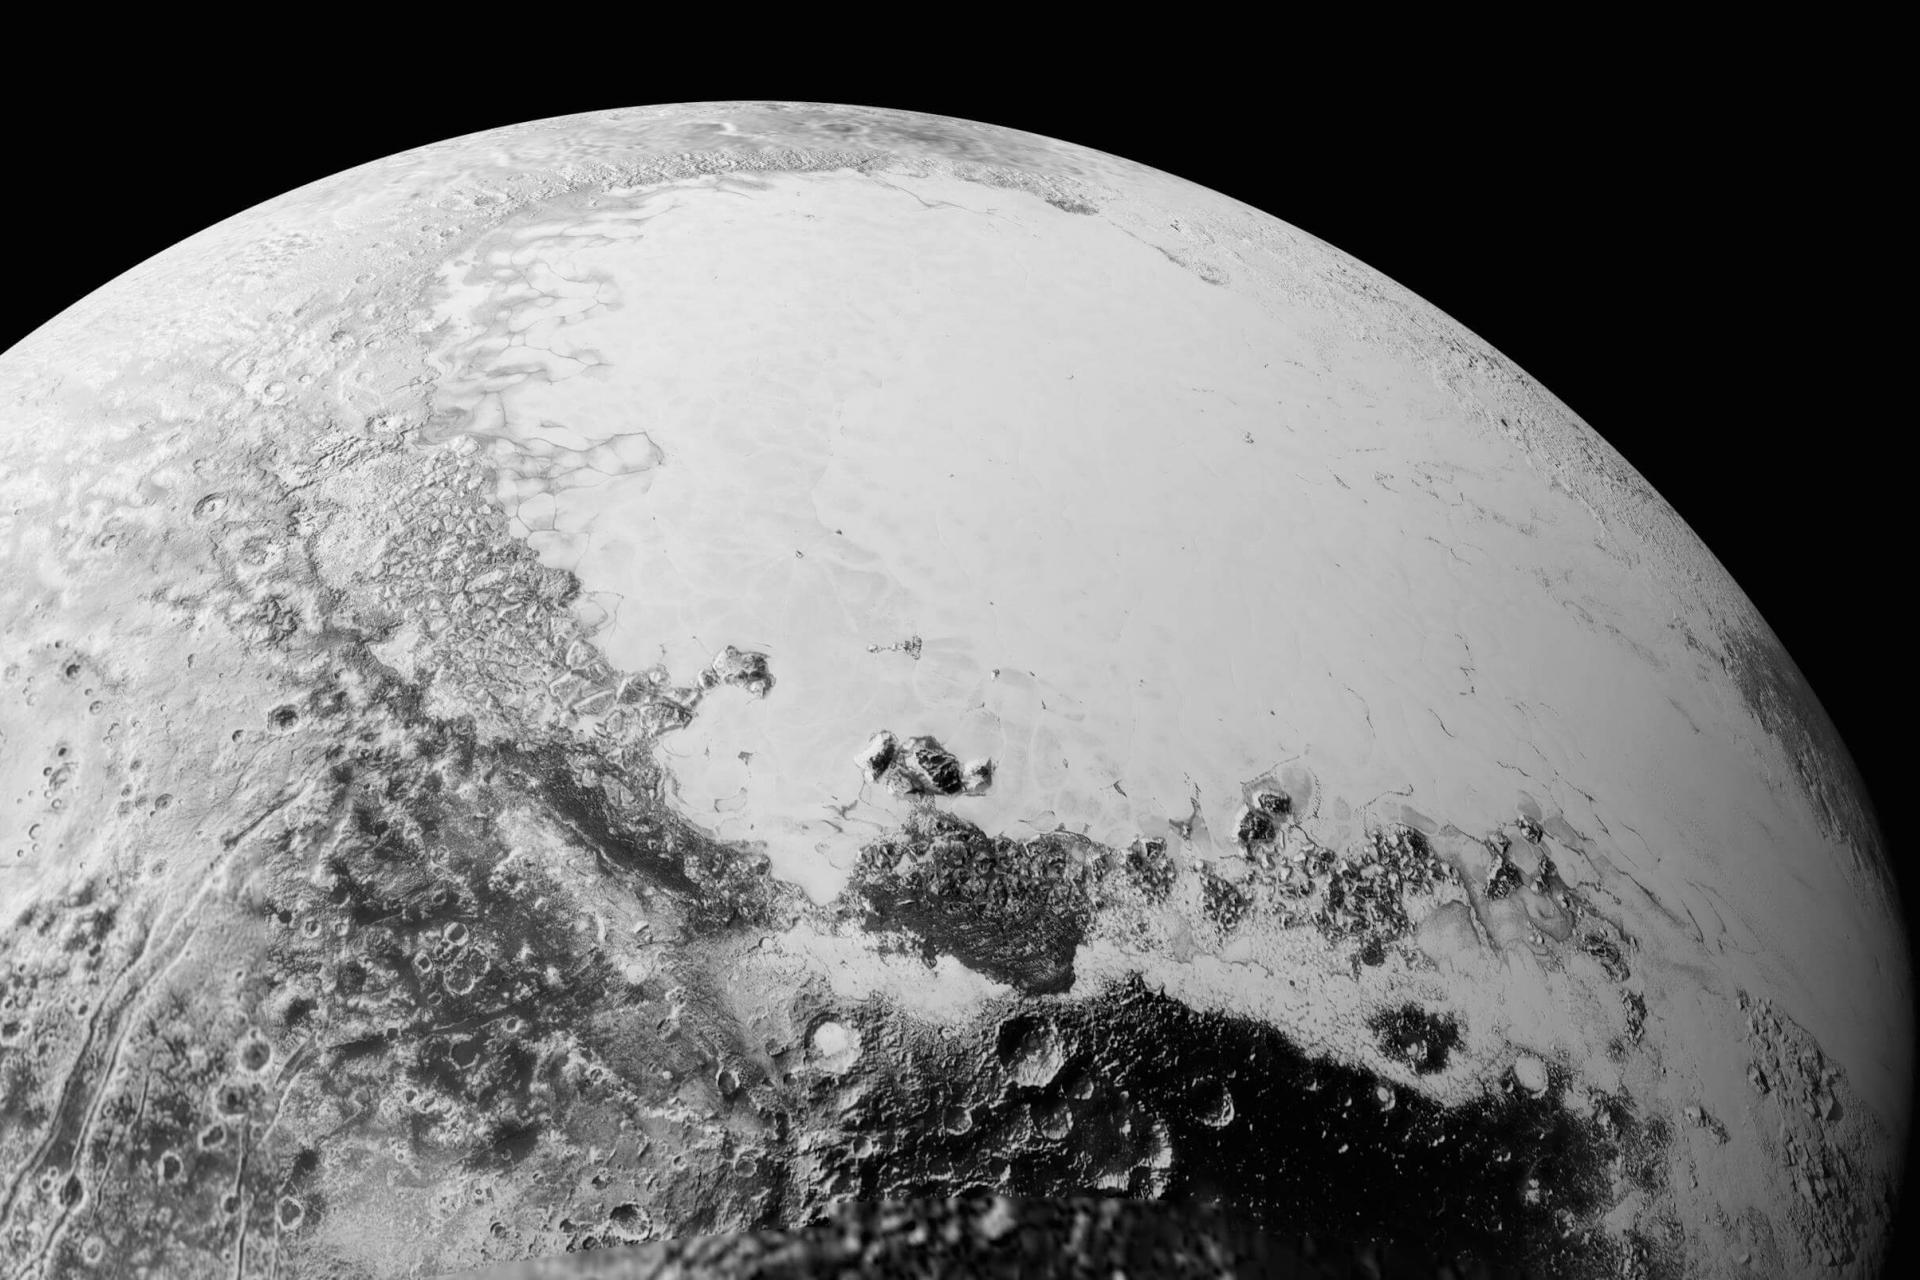 Close up view of Pluto's large heart-shaped glacier and mountains of ice.